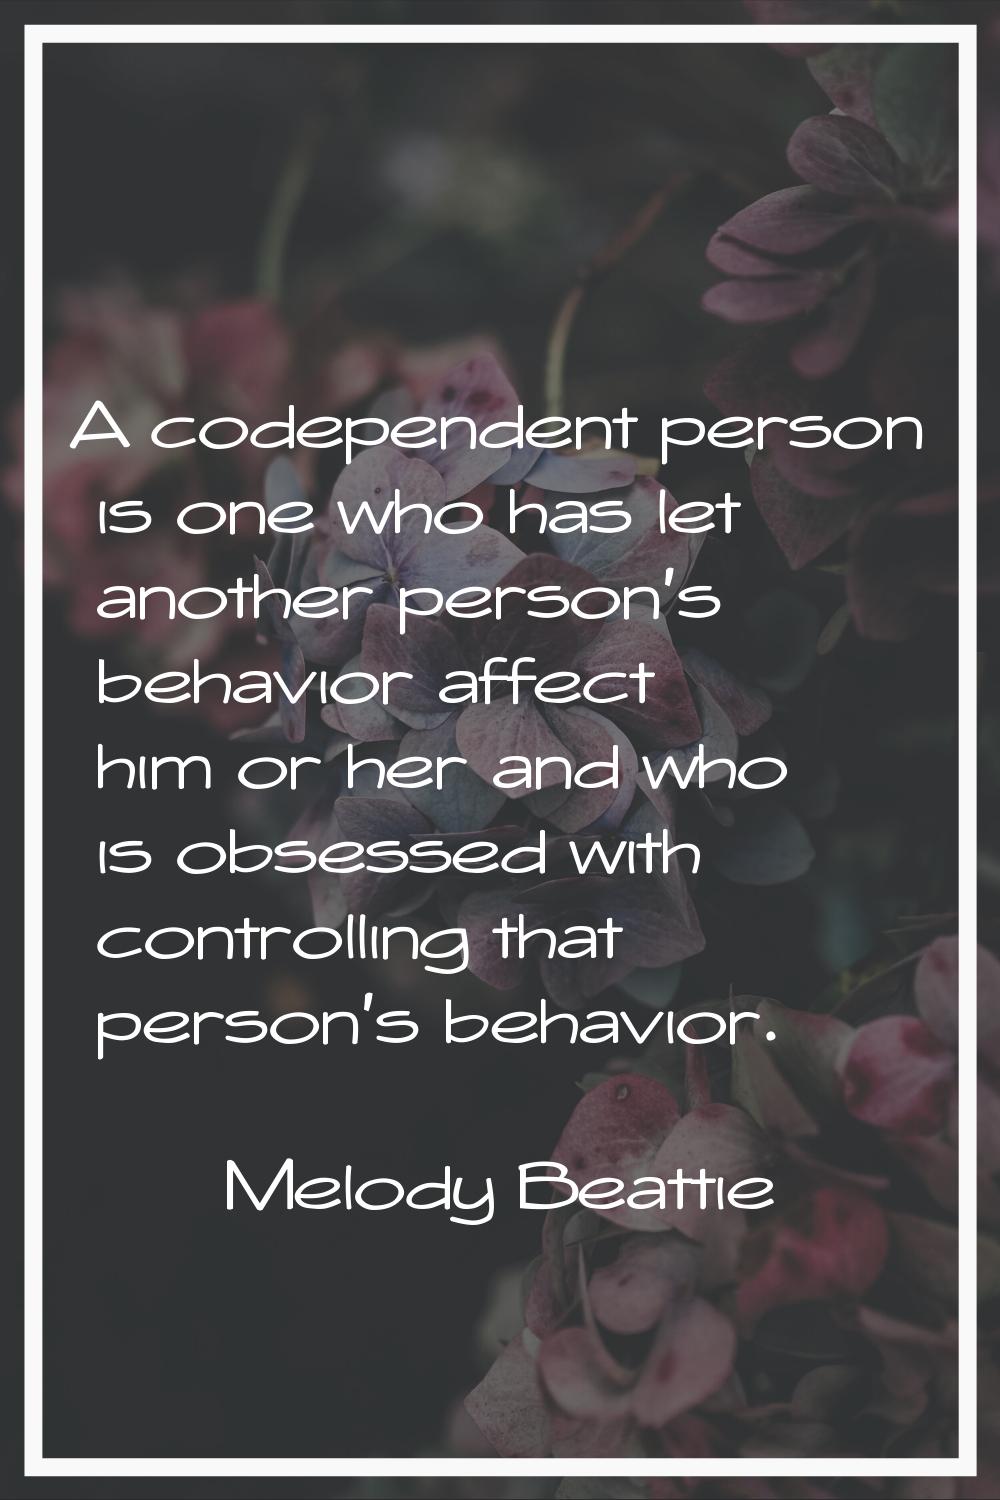 A codependent person is one who has let another person's behavior affect him or her and who is obse